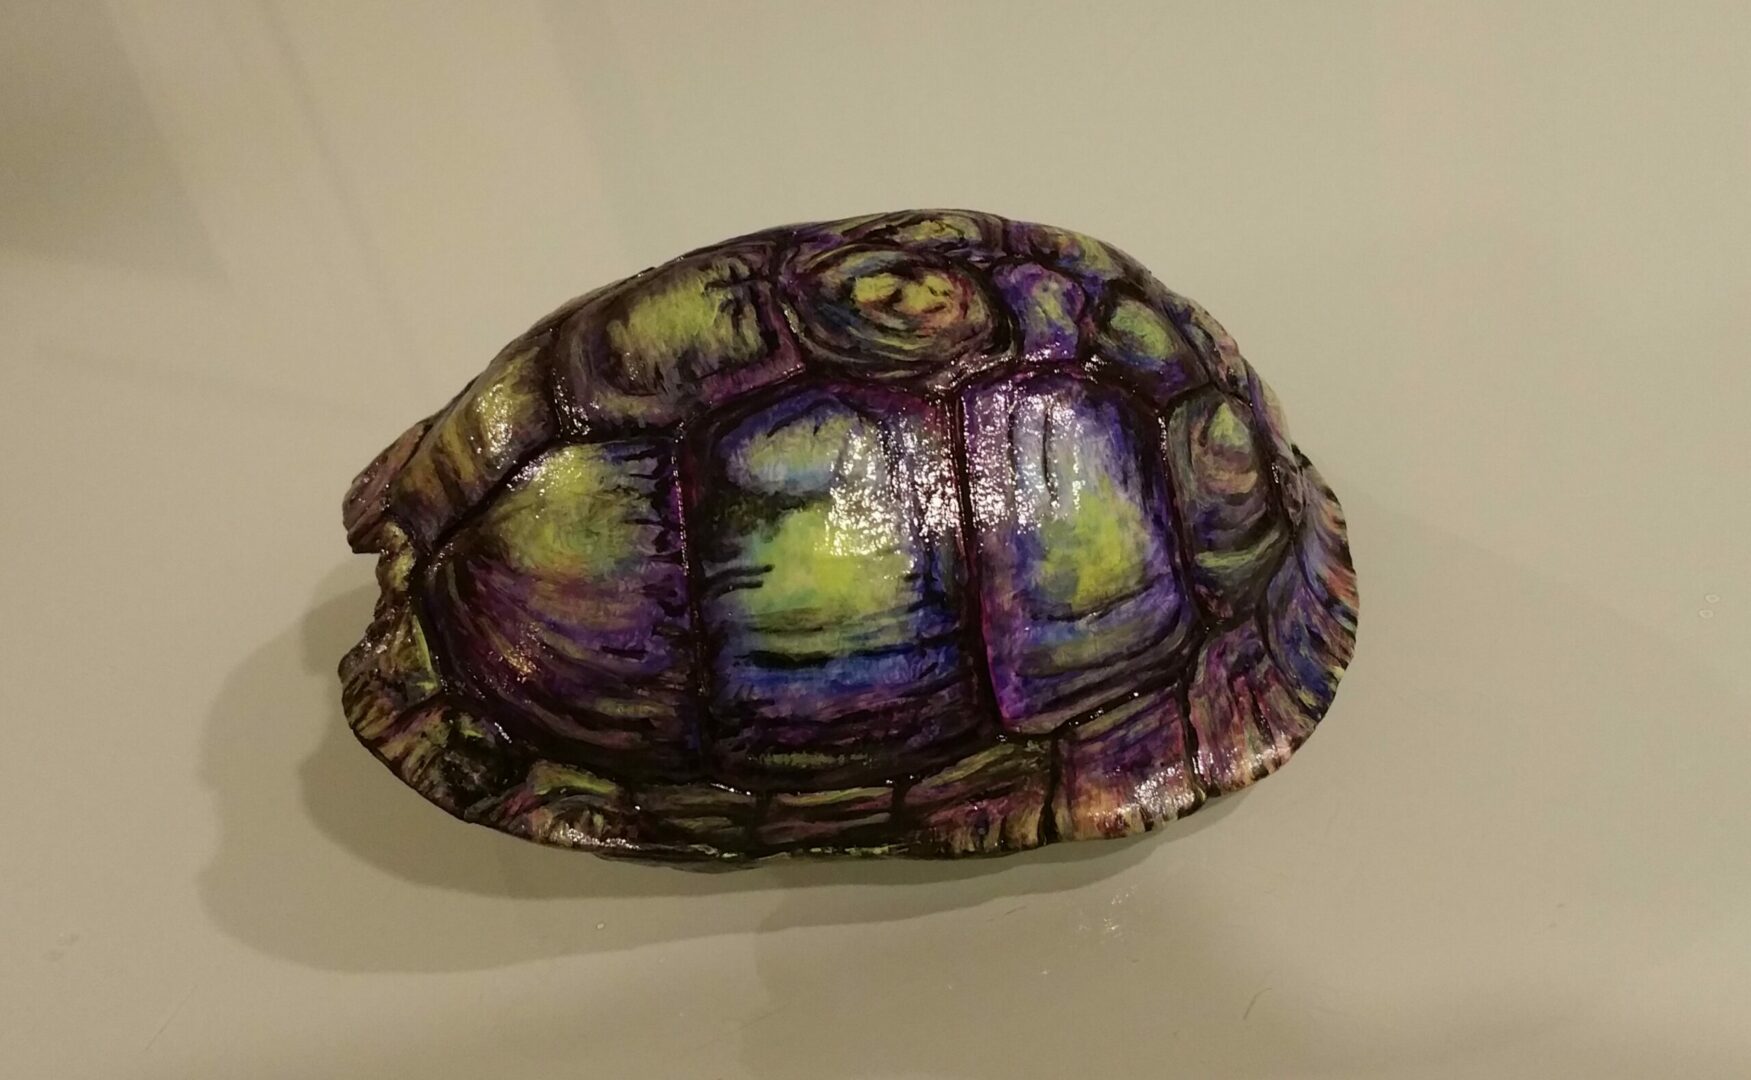 A turtle shell with purple and green paint.